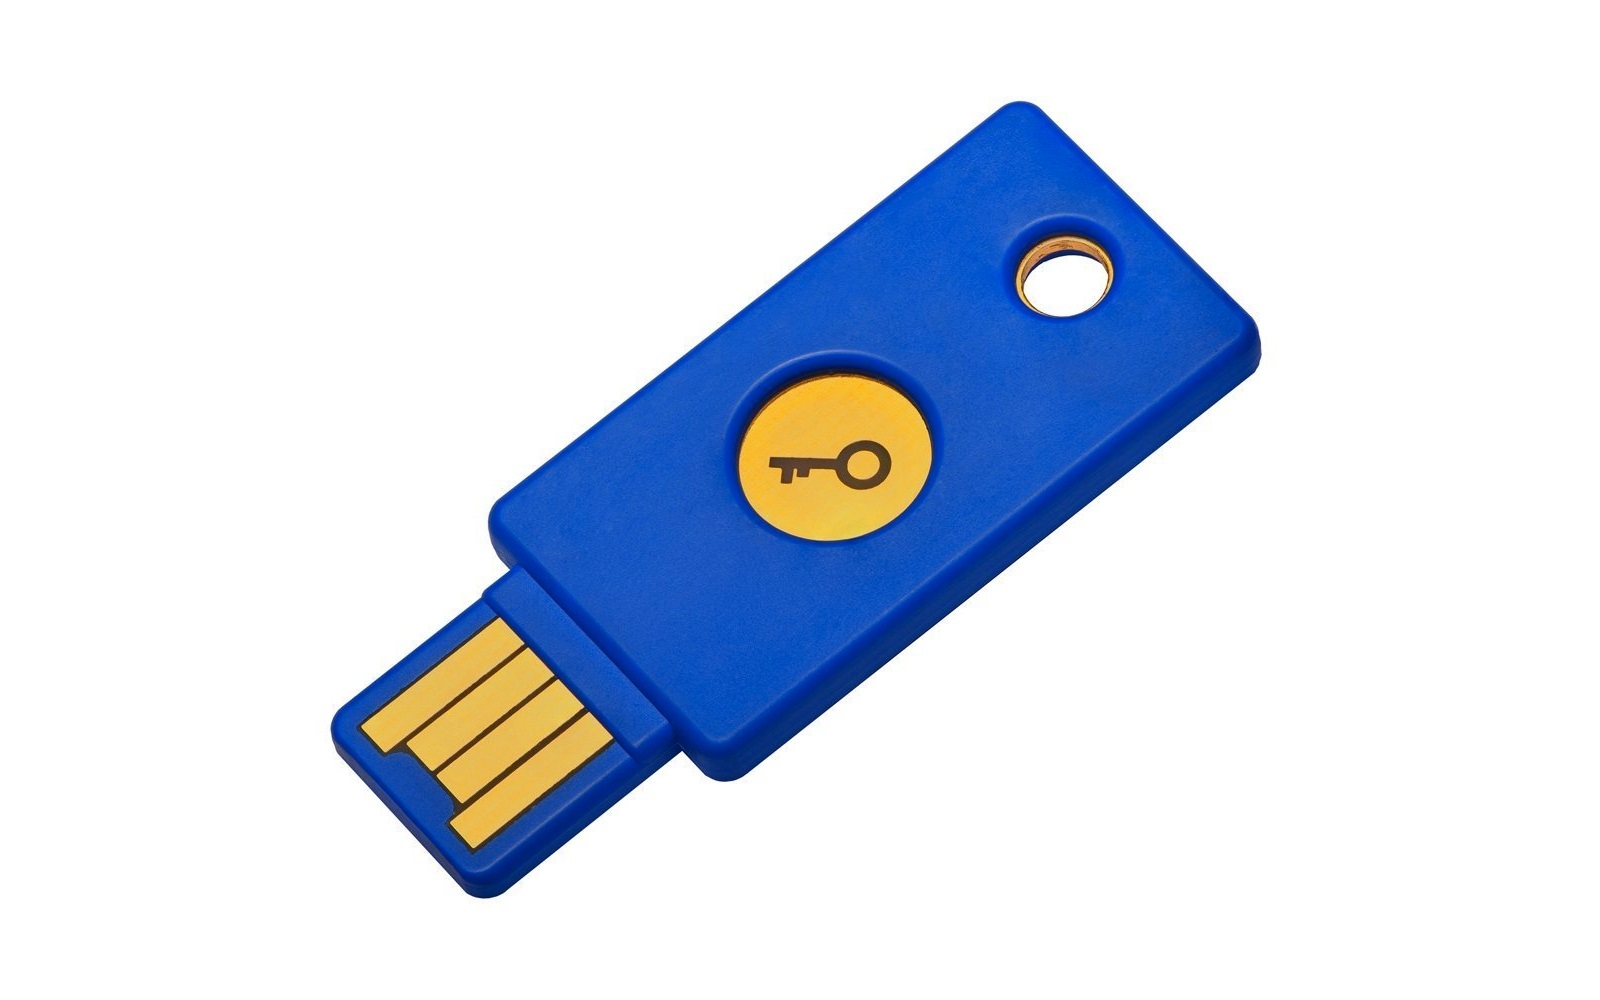 Google's USB stick in support of passwords